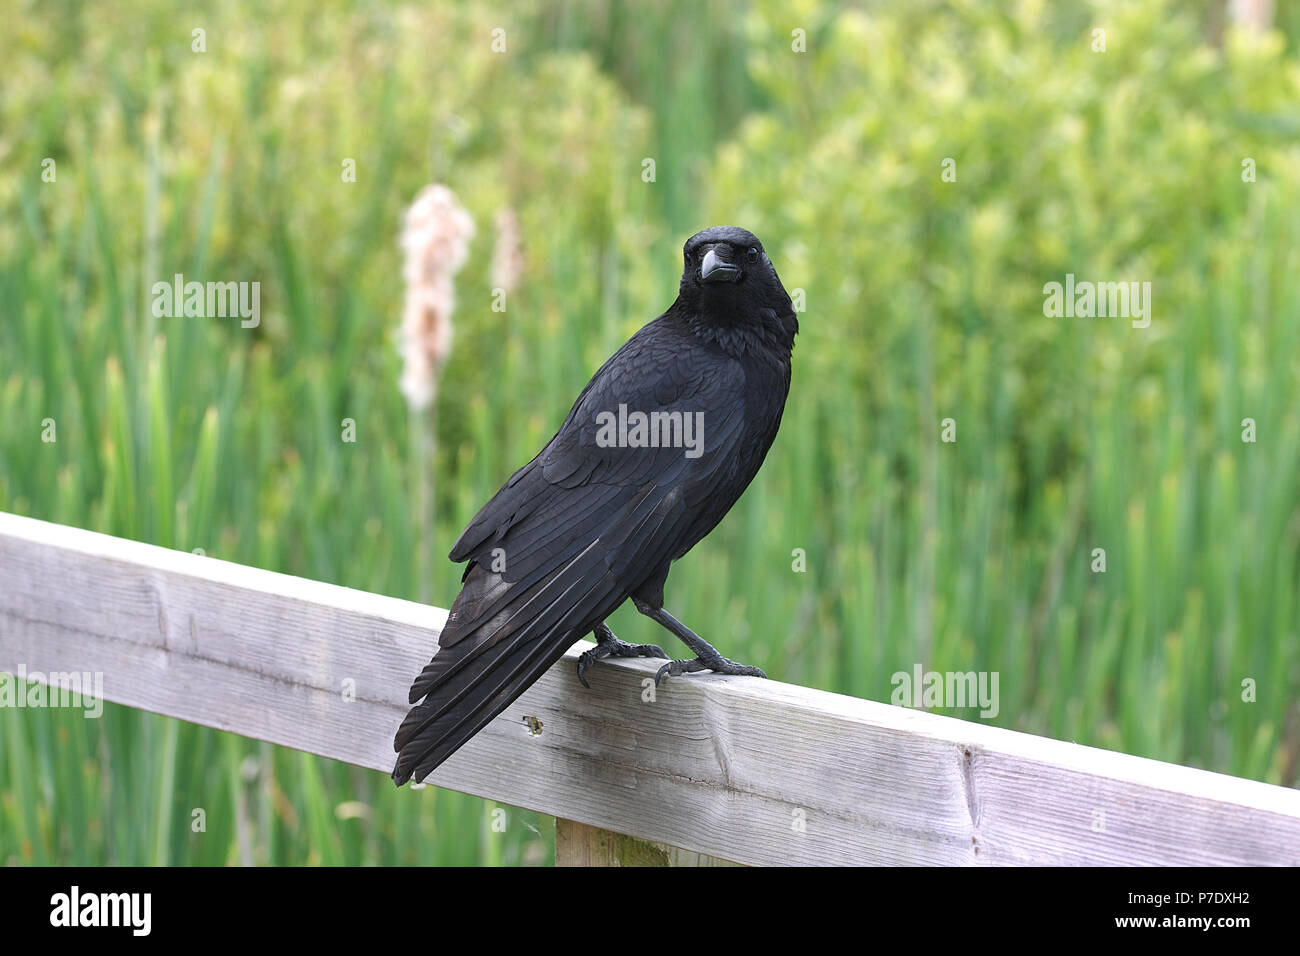 Carrion crow perched on wooden fence Stock Photo